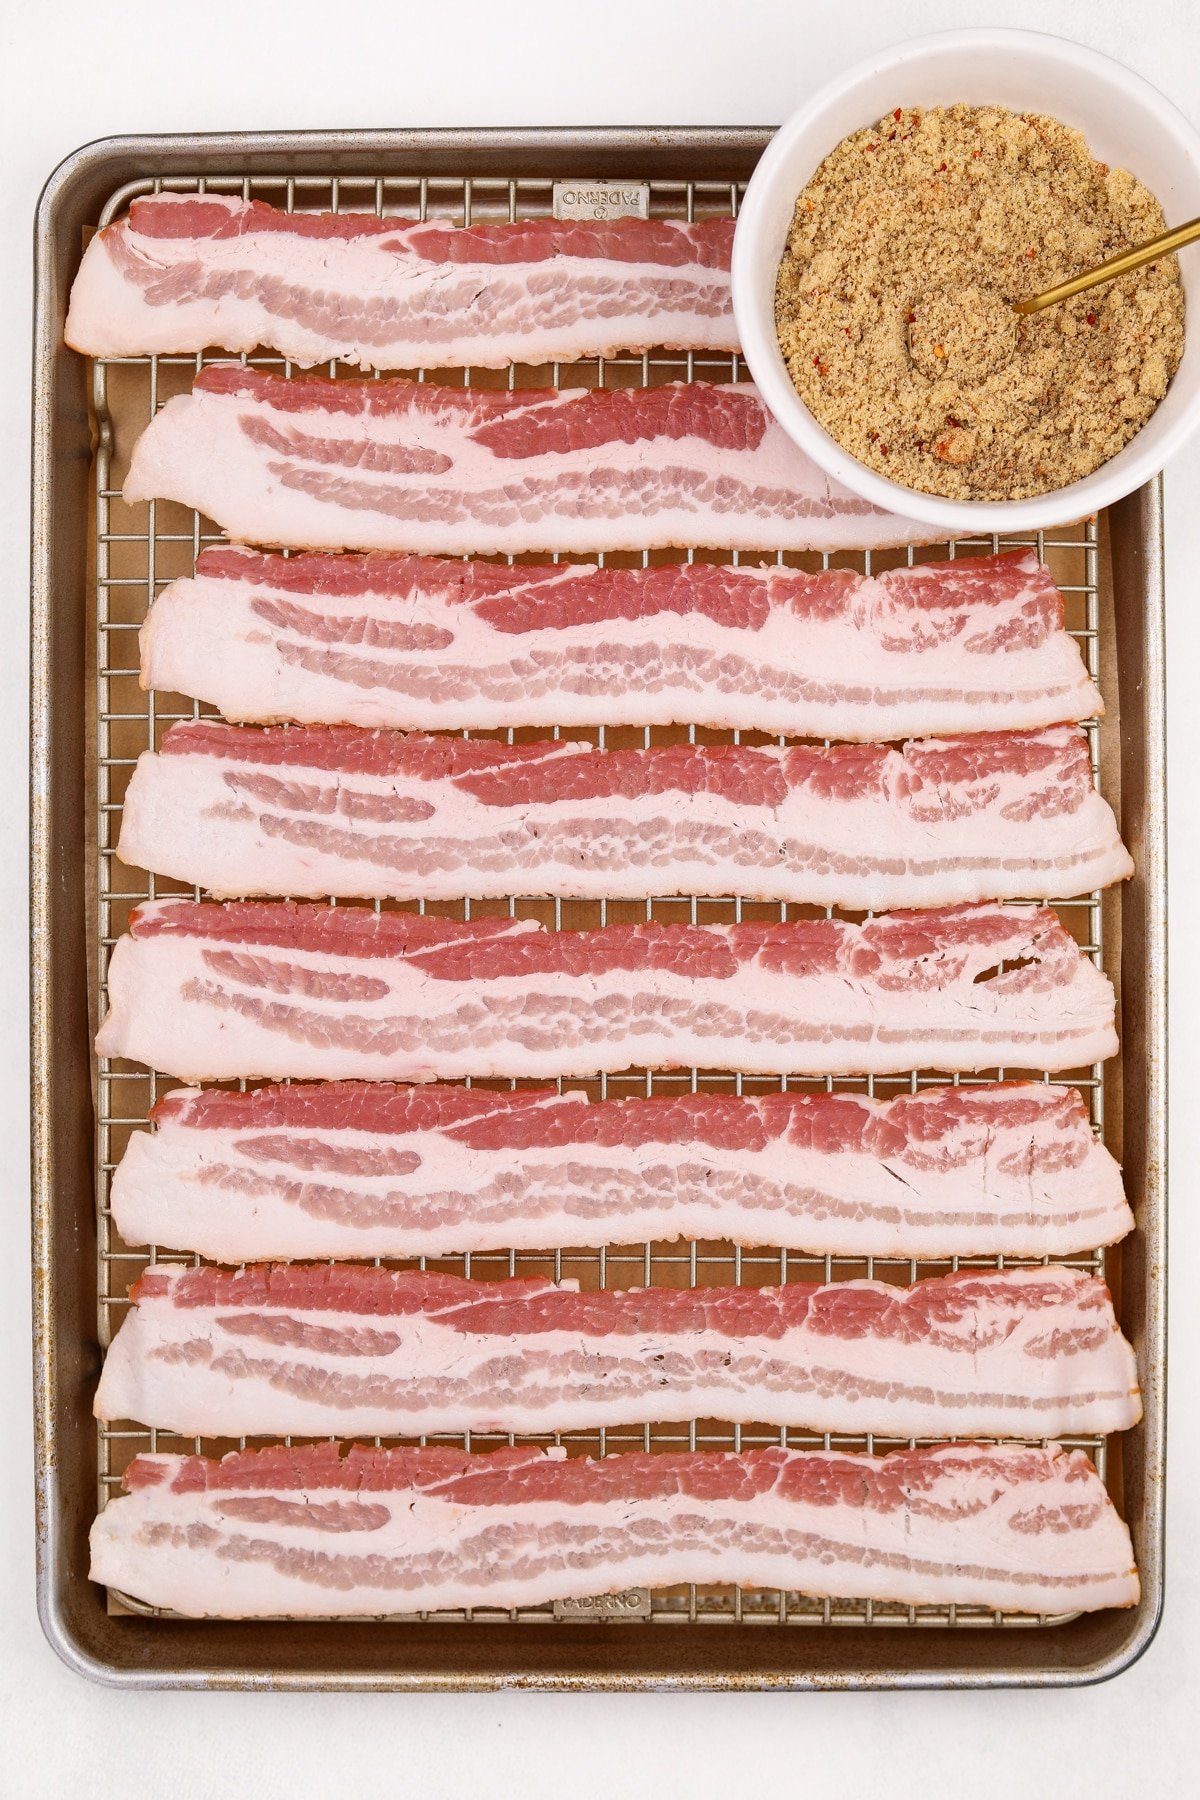 A baking sheet with bacon slices spread out, with a small bowl of brown sugar on the side.